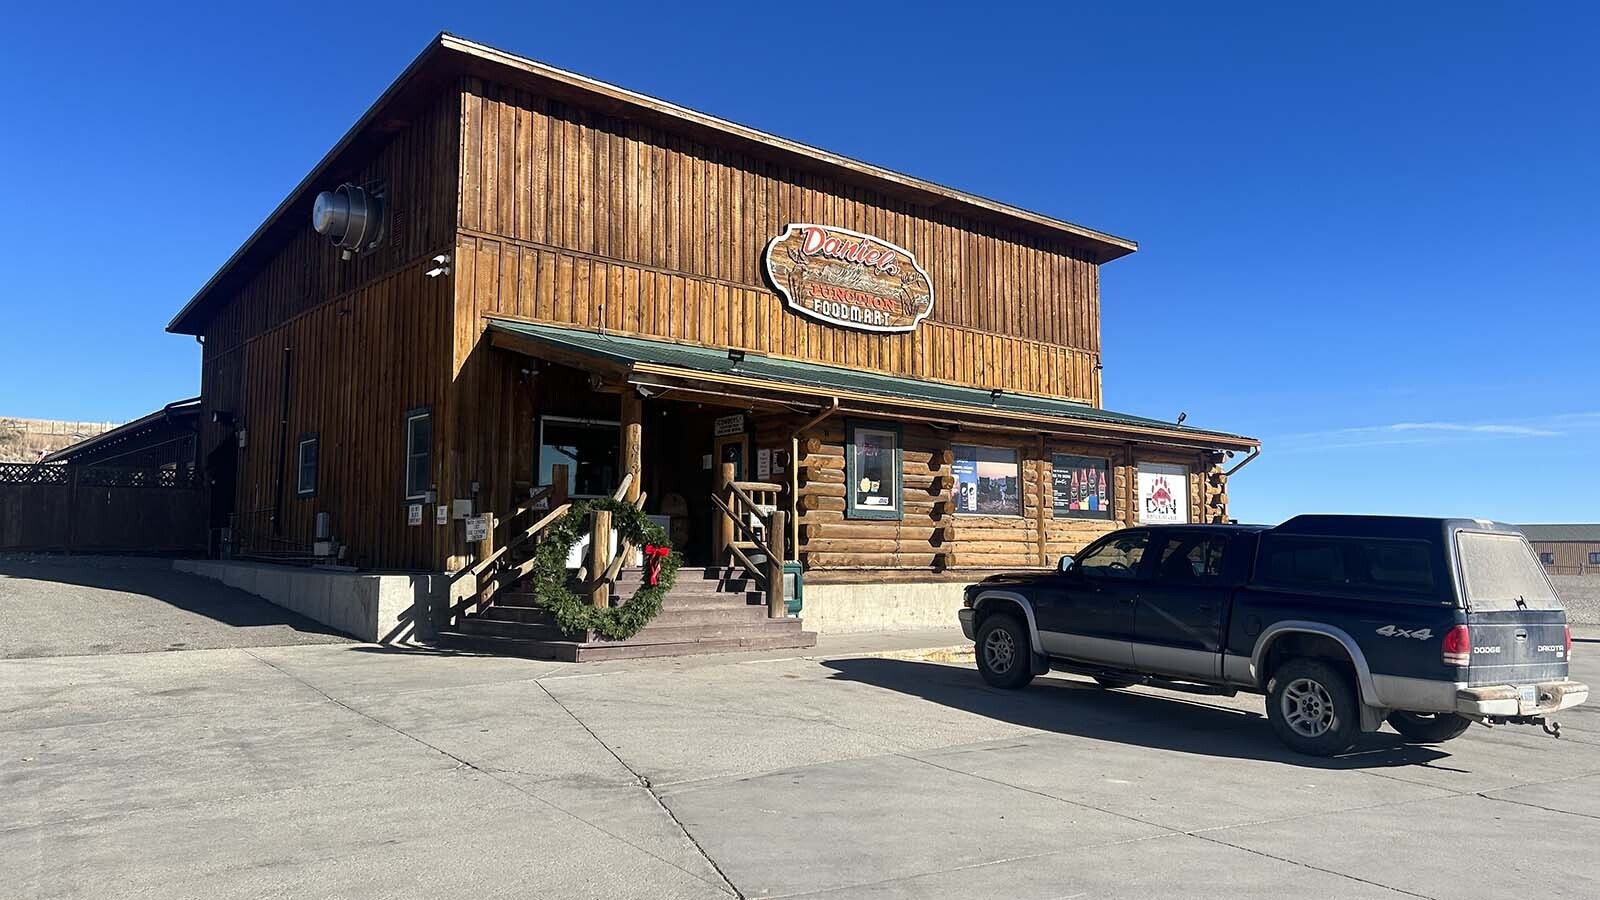 The Daniel Junction Foodmart is located near the intersection of Highways 191 and 189 in Sublette County. The Bear Den Restaurant is located in the rear of the building.